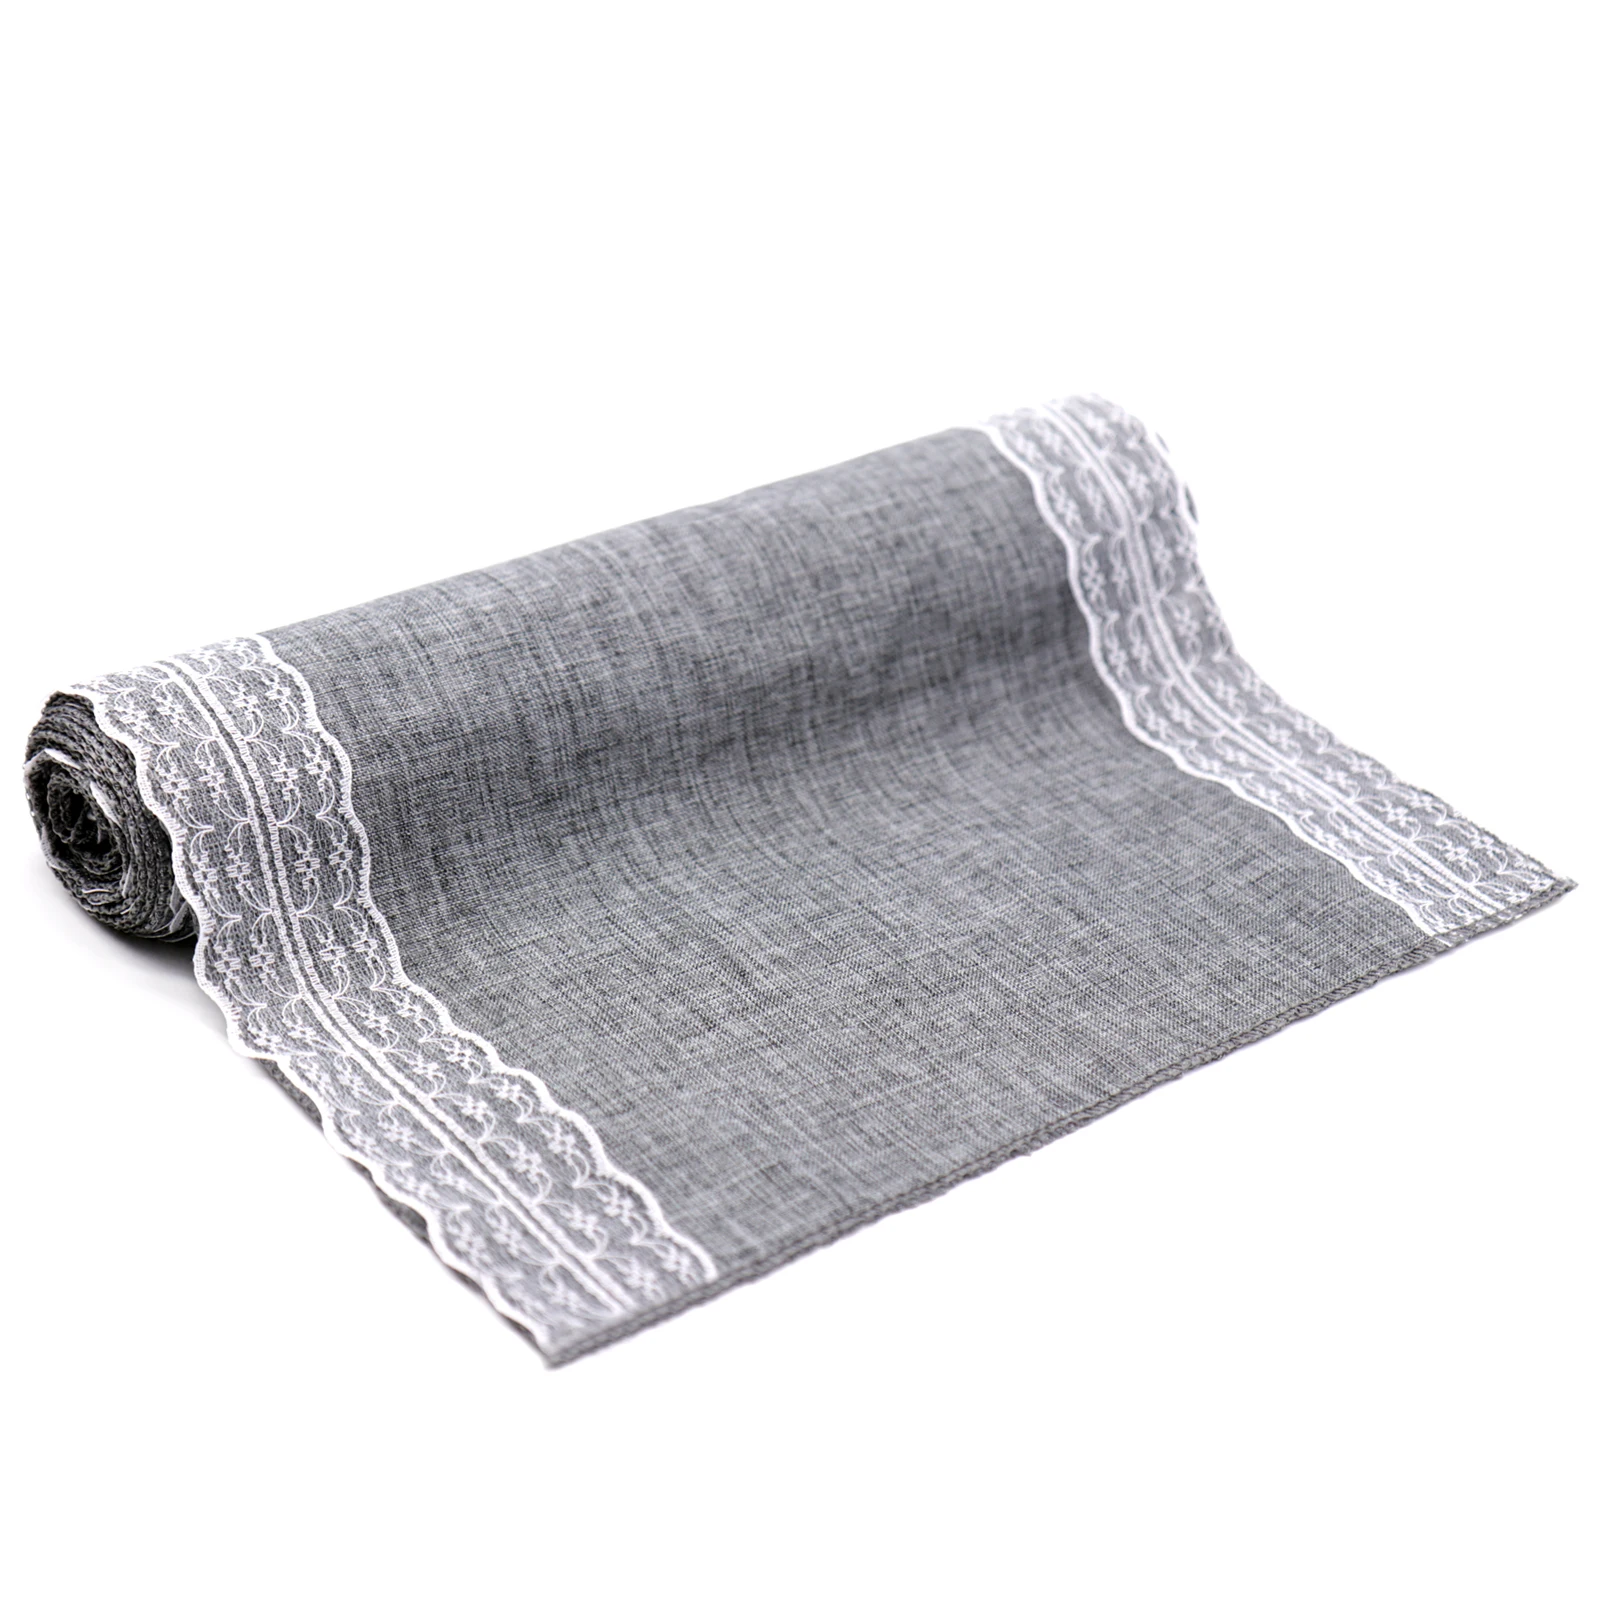 

Gray Khaki Burlap Table Runner Jute Imitated Linen Lace Tablecloth Rustic Wedding Party Banquet Table overlay Home Textiles